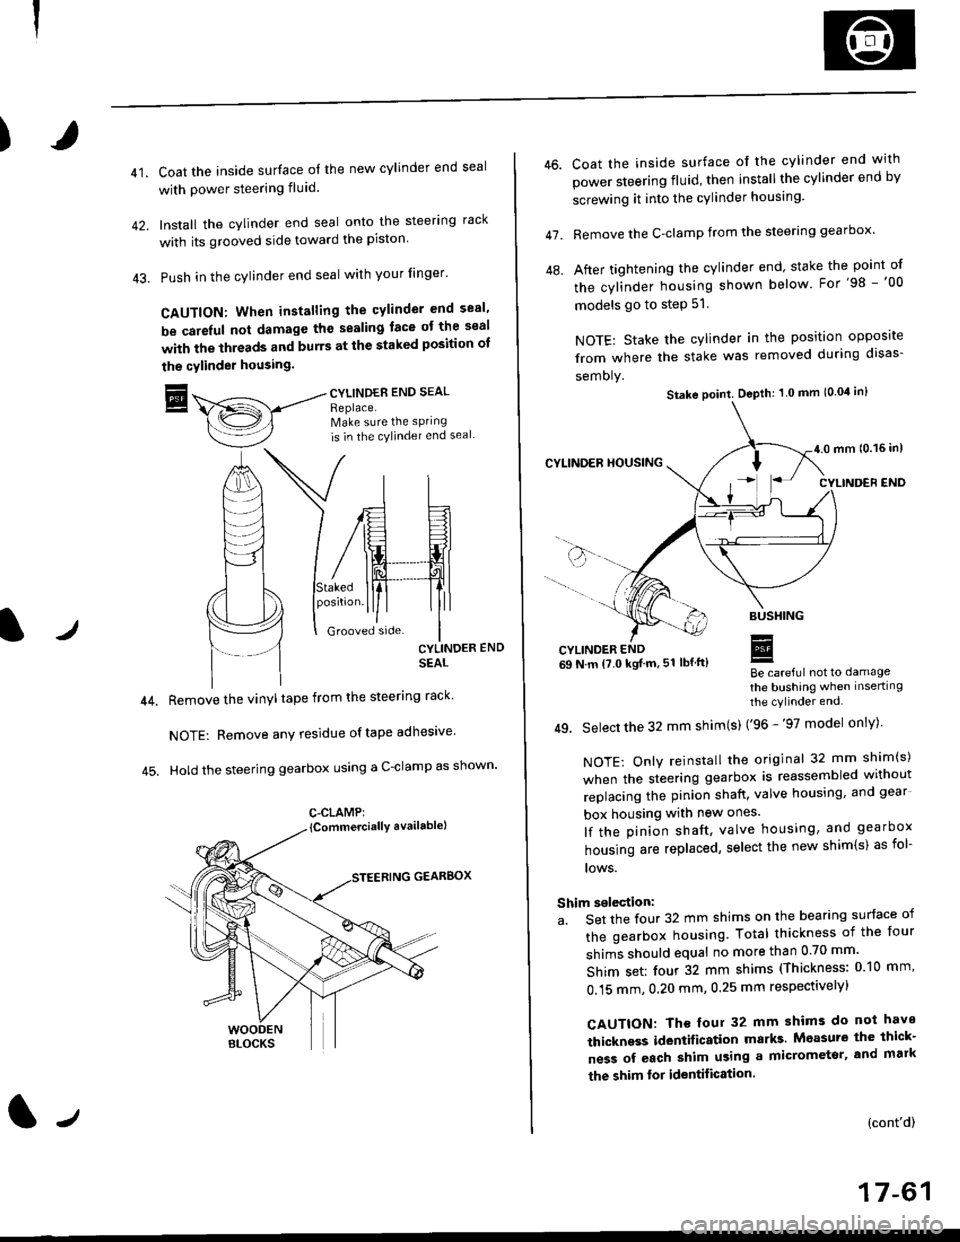 HONDA CIVIC 1996 6.G Service Manual )
41.Coat the inside surface of the new cylinder end seal
with power steering fluid.
Install the cylinder end seal onto the steering rack
with its grooved side toward the piston
Push in the cylinder 